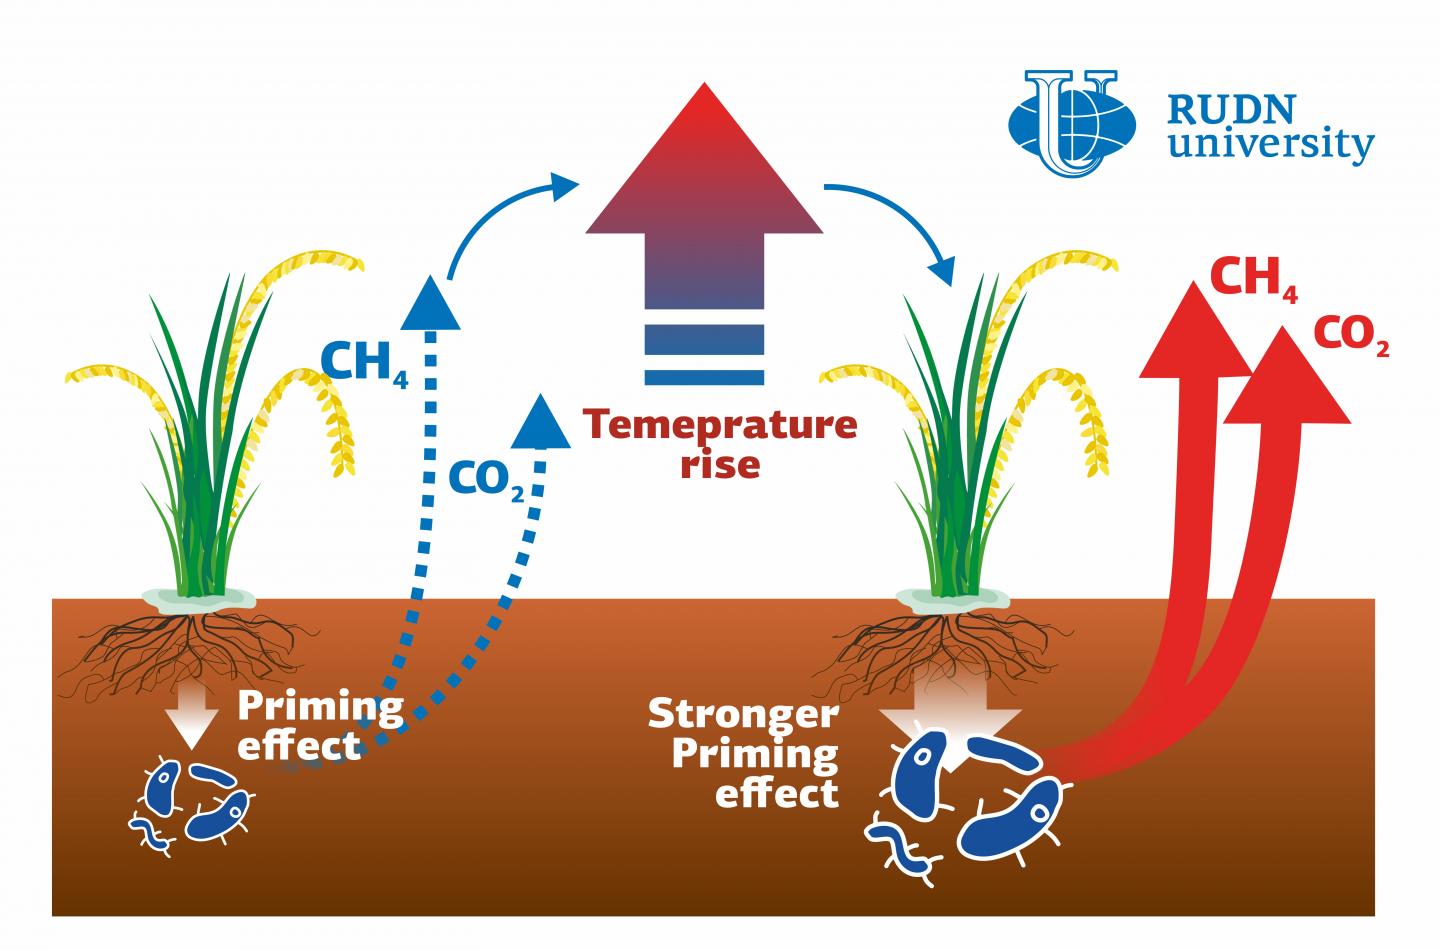 RUDN University Scientist Showed Global Warming Effect on Greenhouse Gas Emissions in Paddy Soils